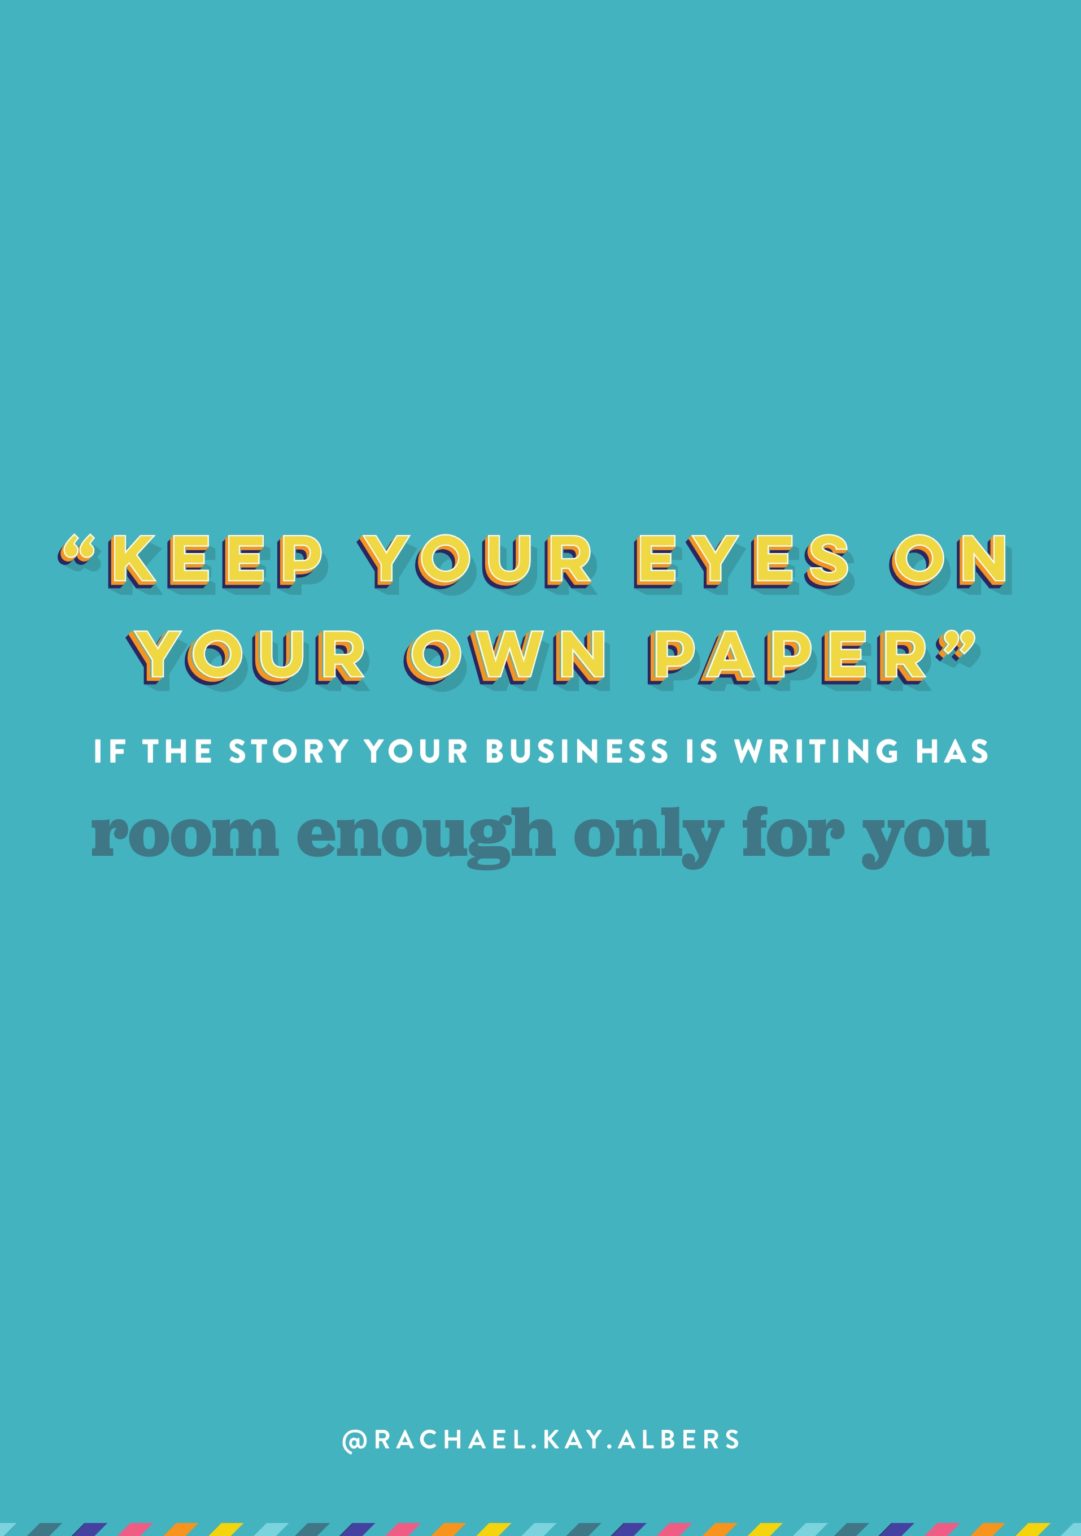 Keep your eyes on your own paper if the story your business is writing has room enough only for you